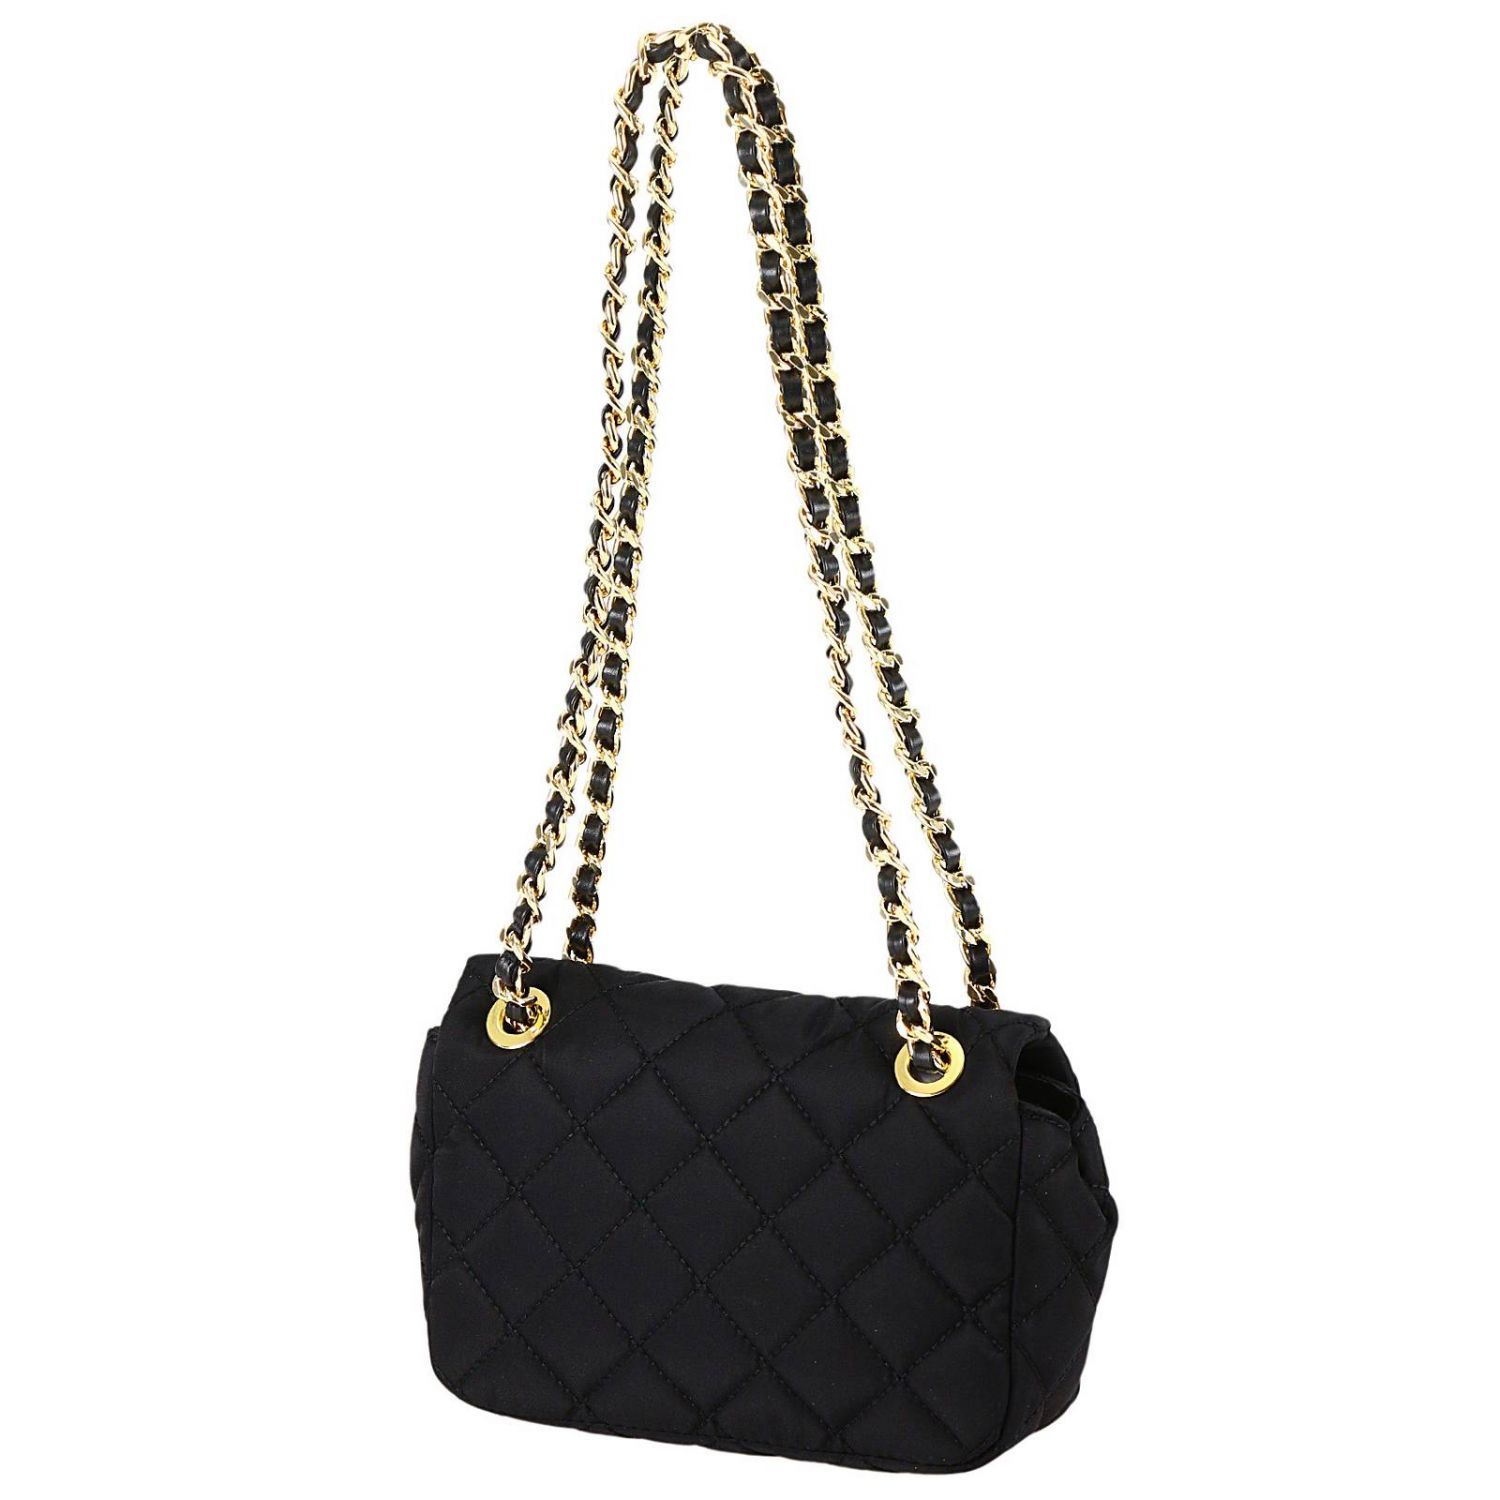 Moschino Couture Outlet: Shoulder bag women | Mini Bag Moschino Couture ...